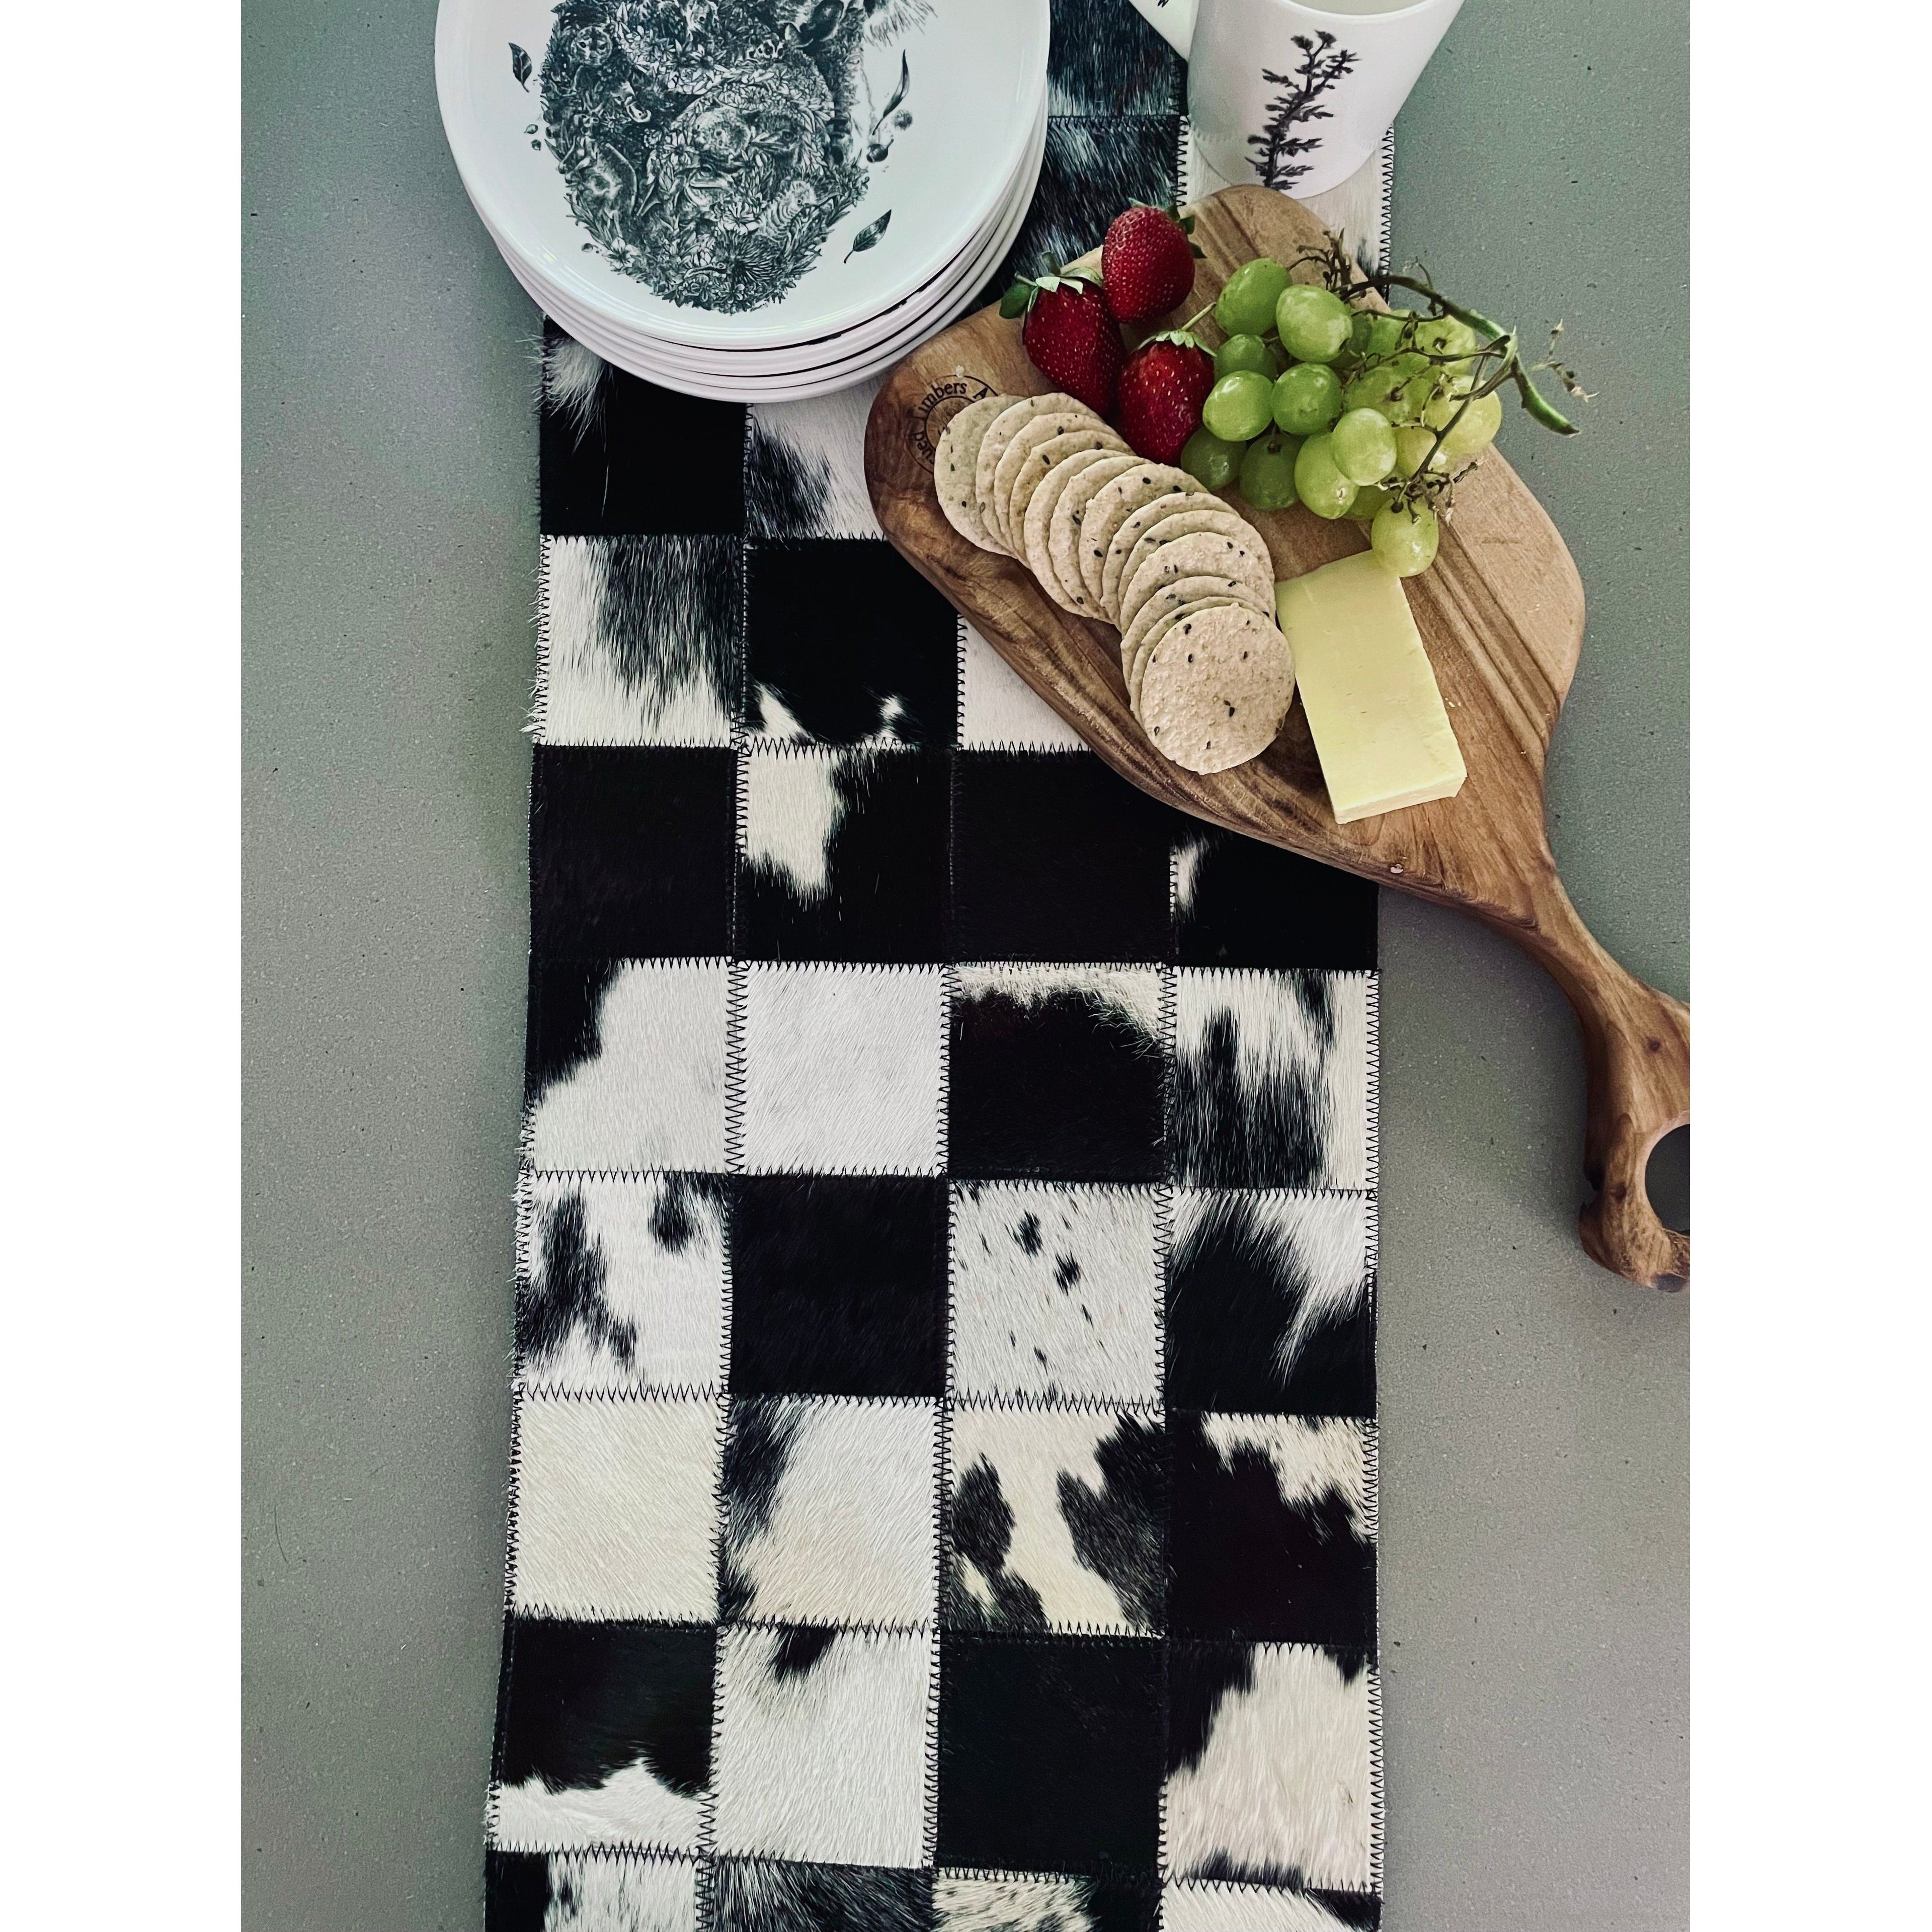 Cowhide table runner - choose your colours